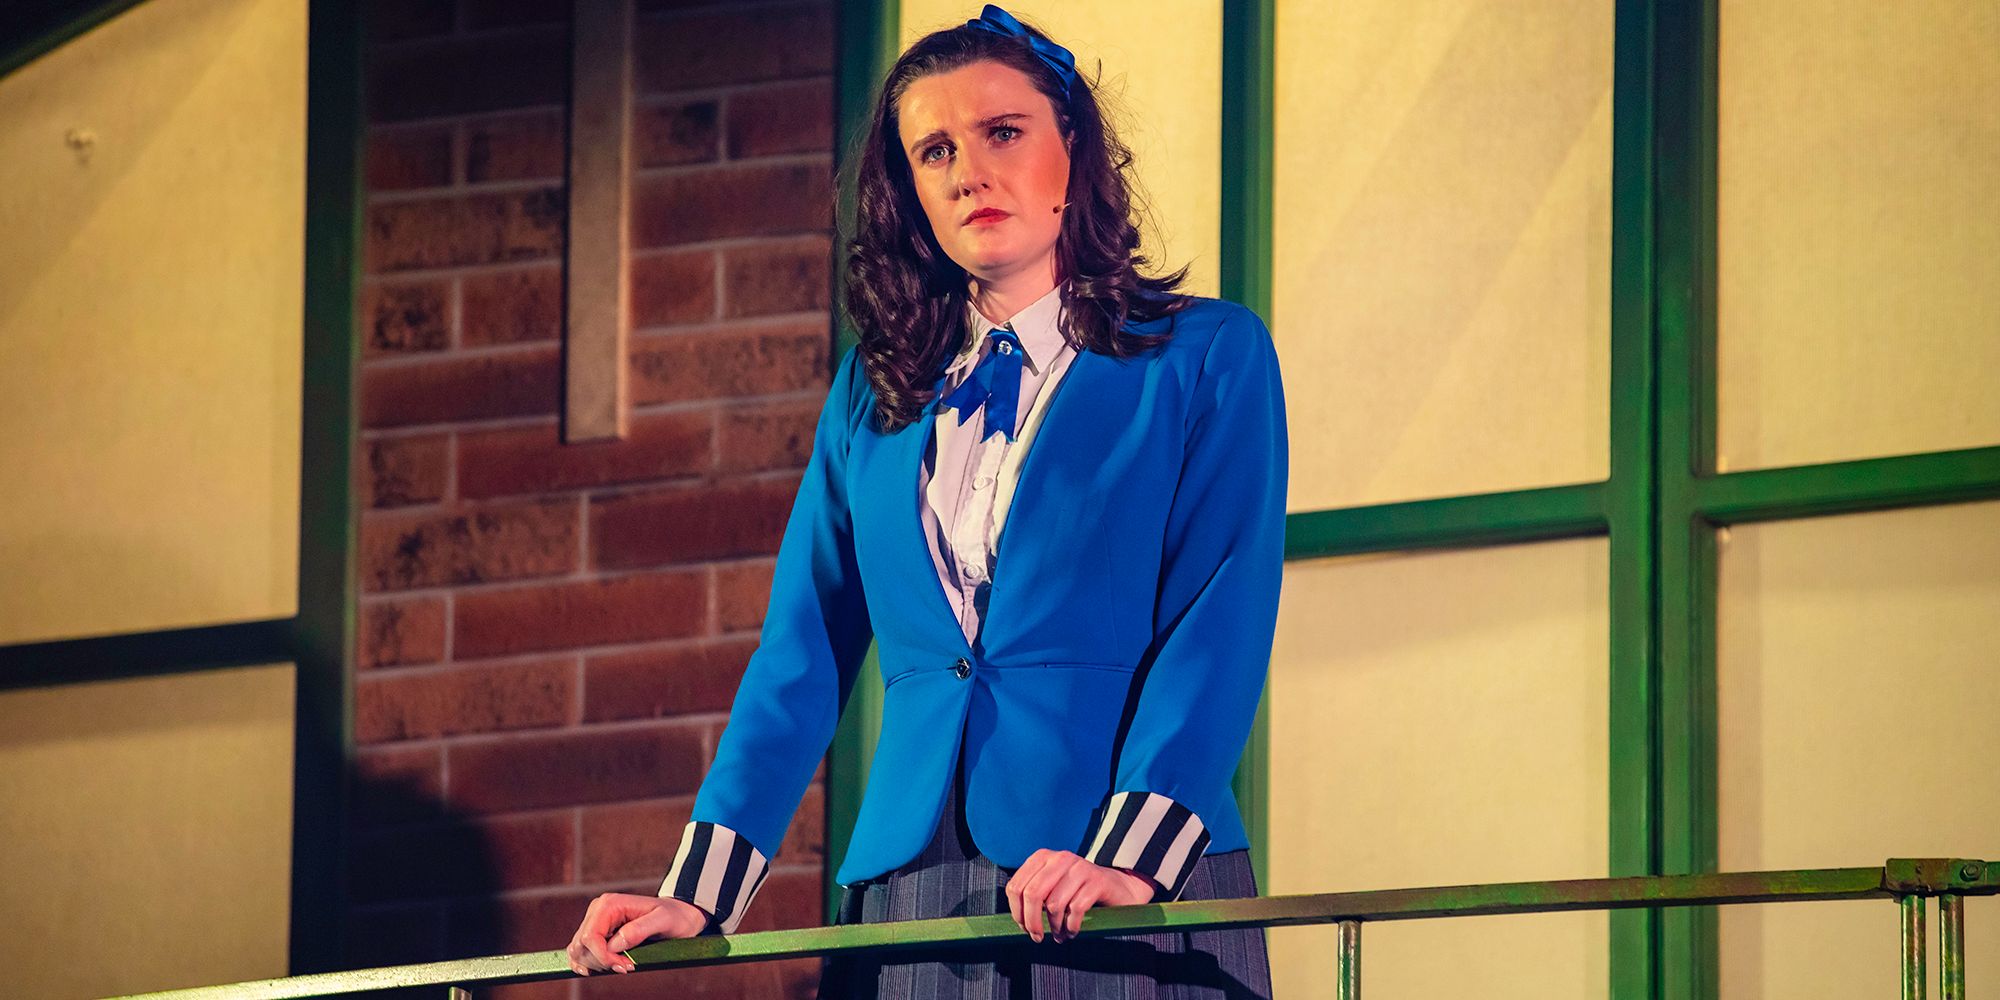 Heathers The Musical Review A BigHearted Tale With Tasteful Changes